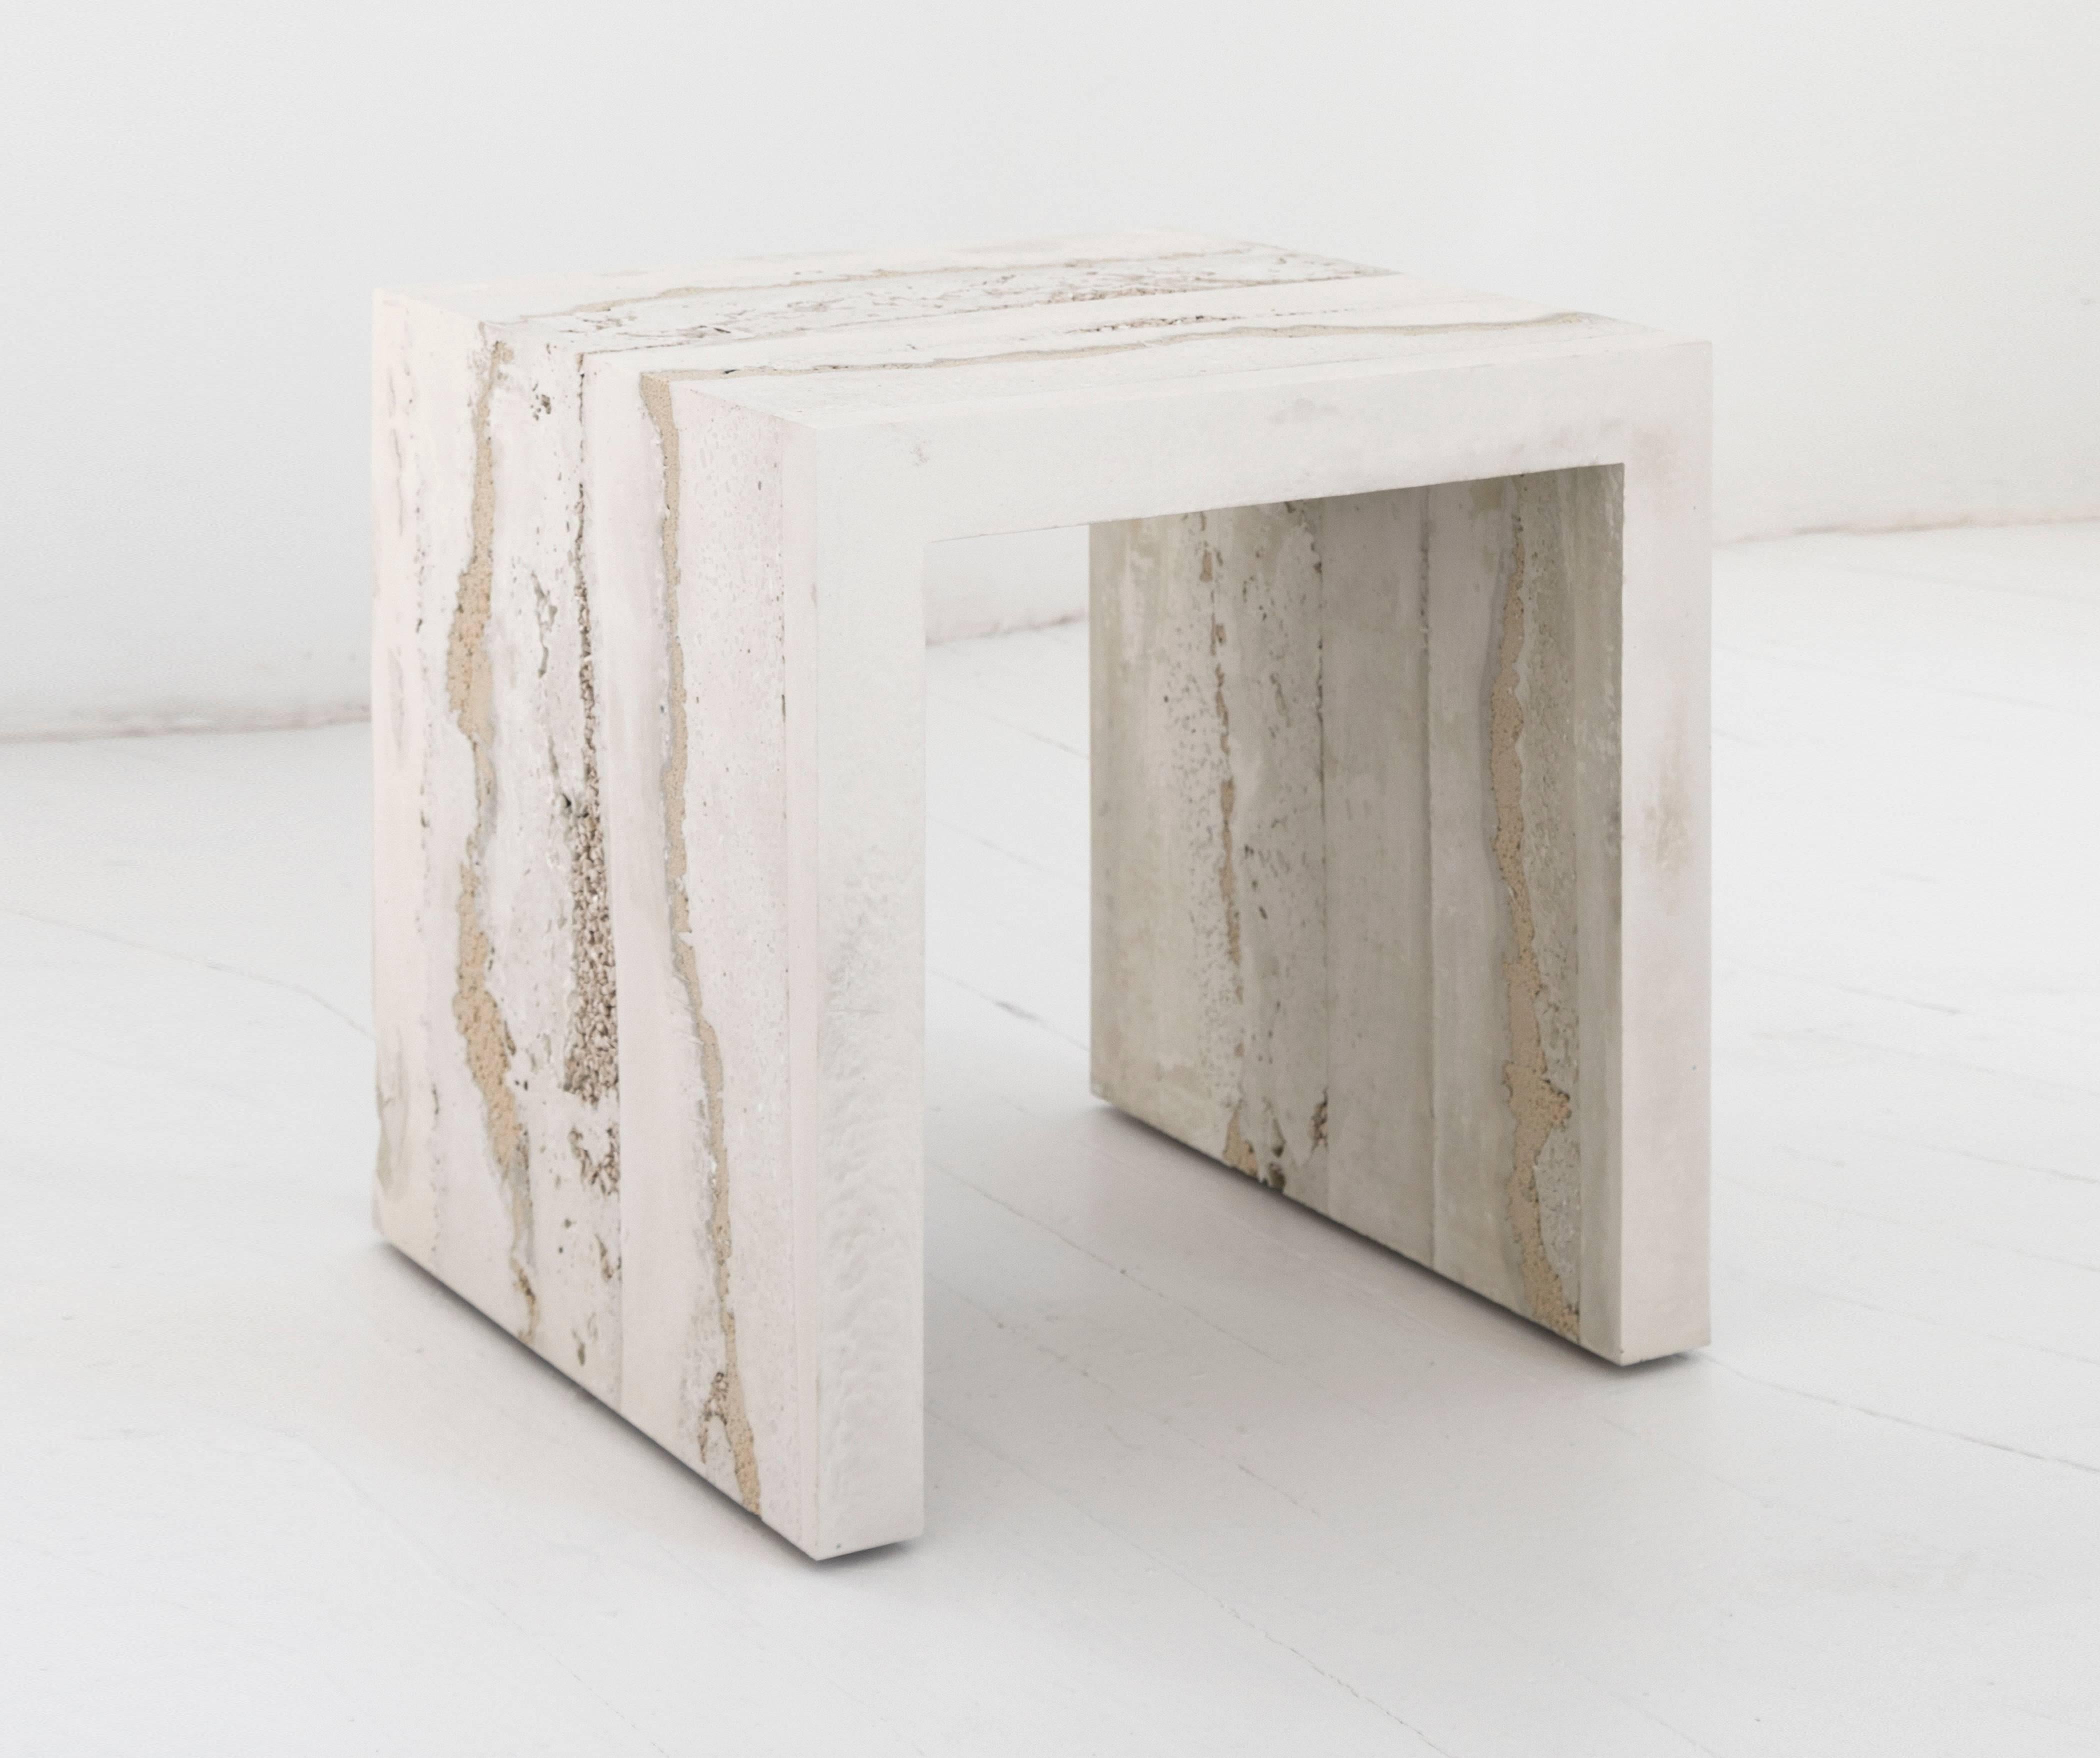 A layering of cement, porcelain, and sand, the made-to-order side table consists of gradients of tones and textures suggesting layers of earth. The hand-dyed granules are stratified with delicate veins and ombre effects to create an organic piece of